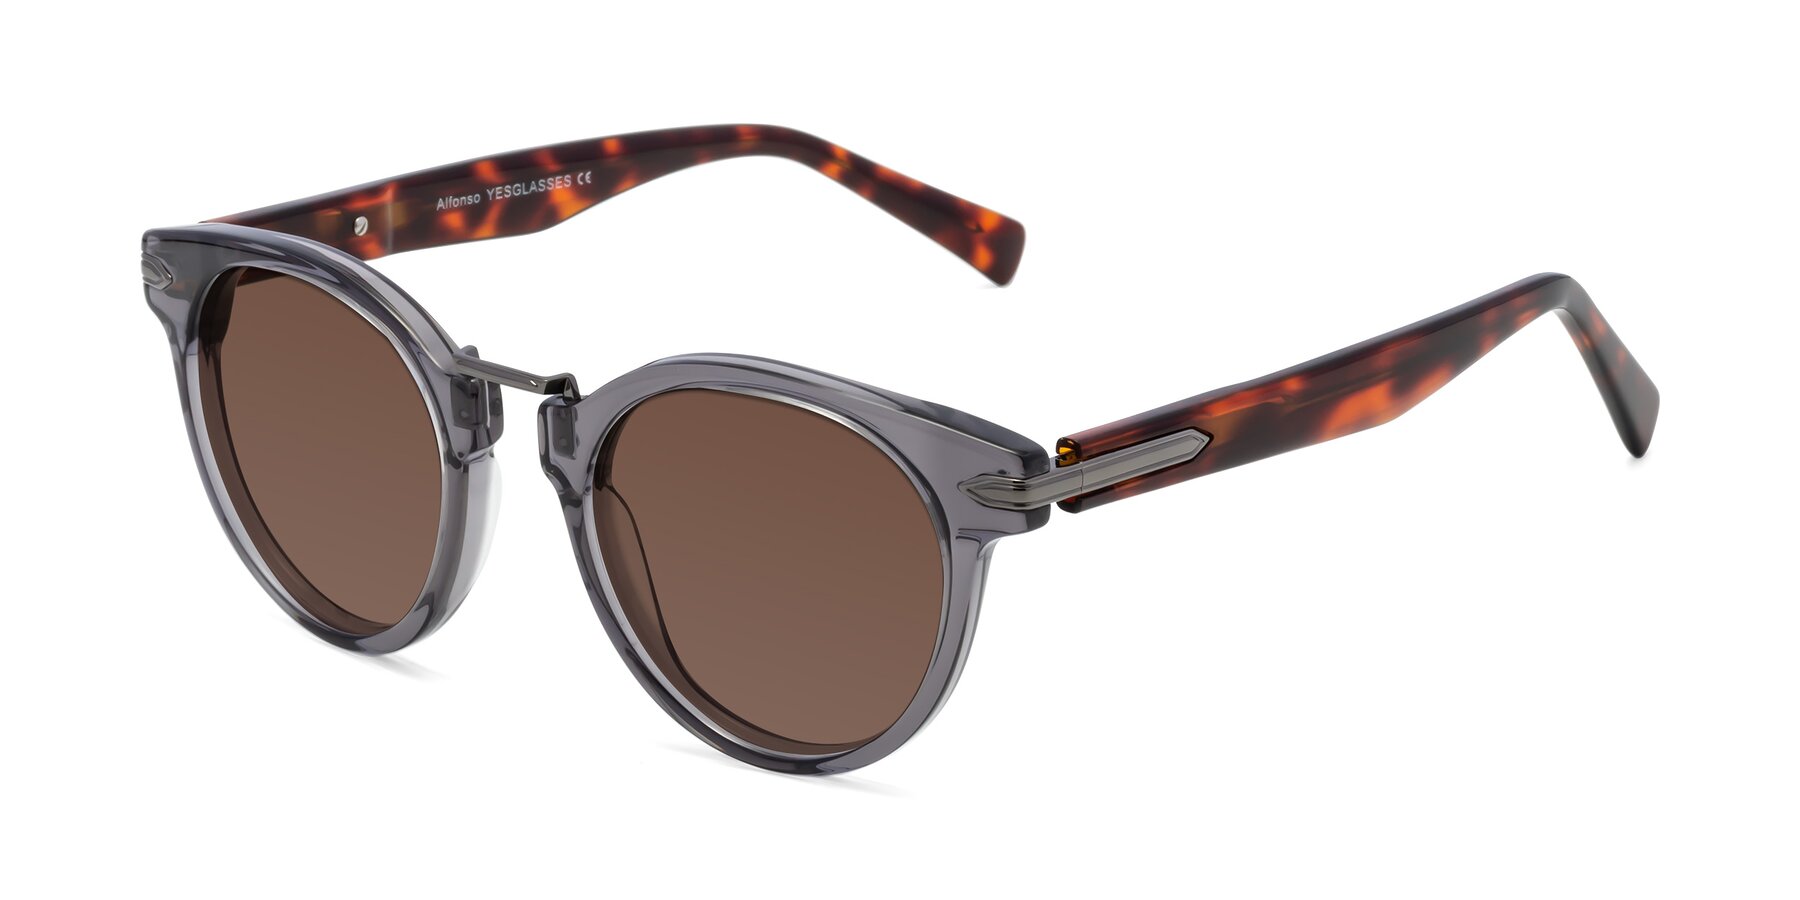 Angle of Alfonso in Gray /Tortoise with Brown Tinted Lenses